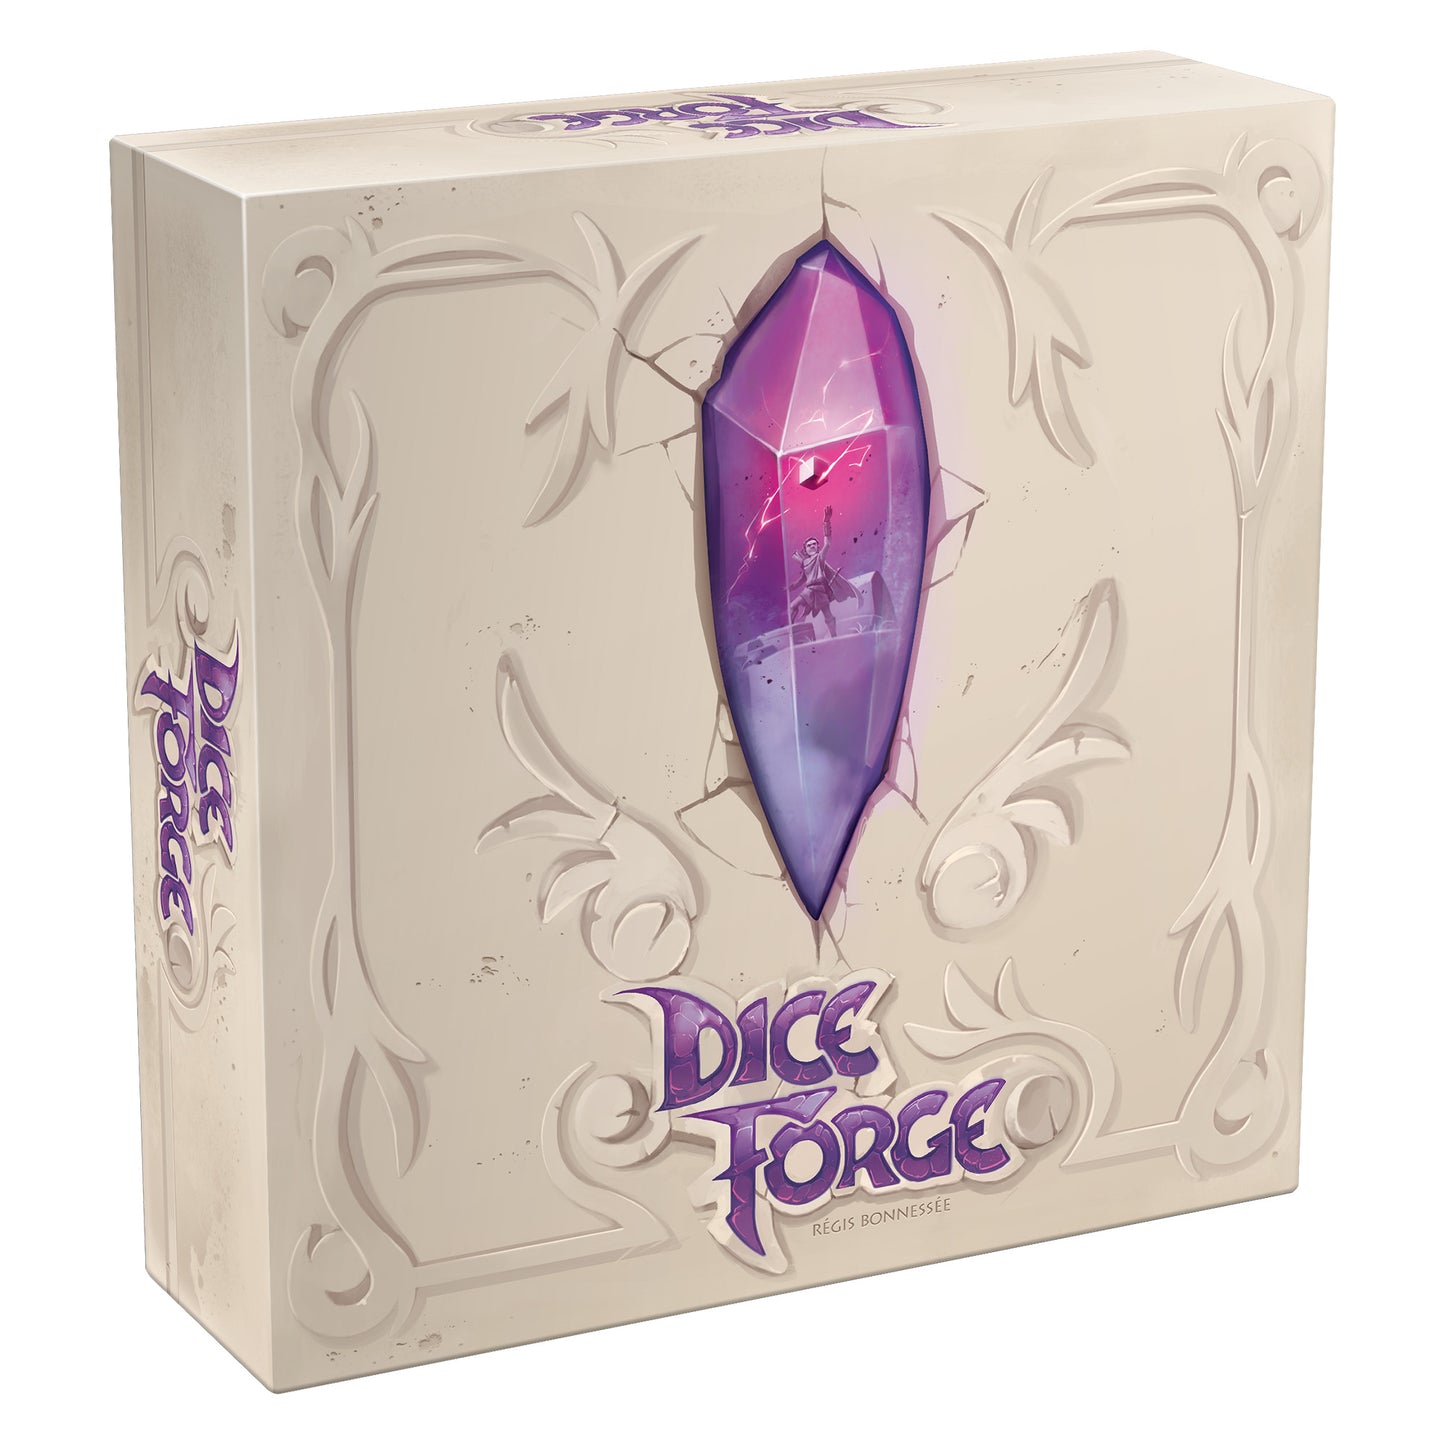 Dice Forge Board Game